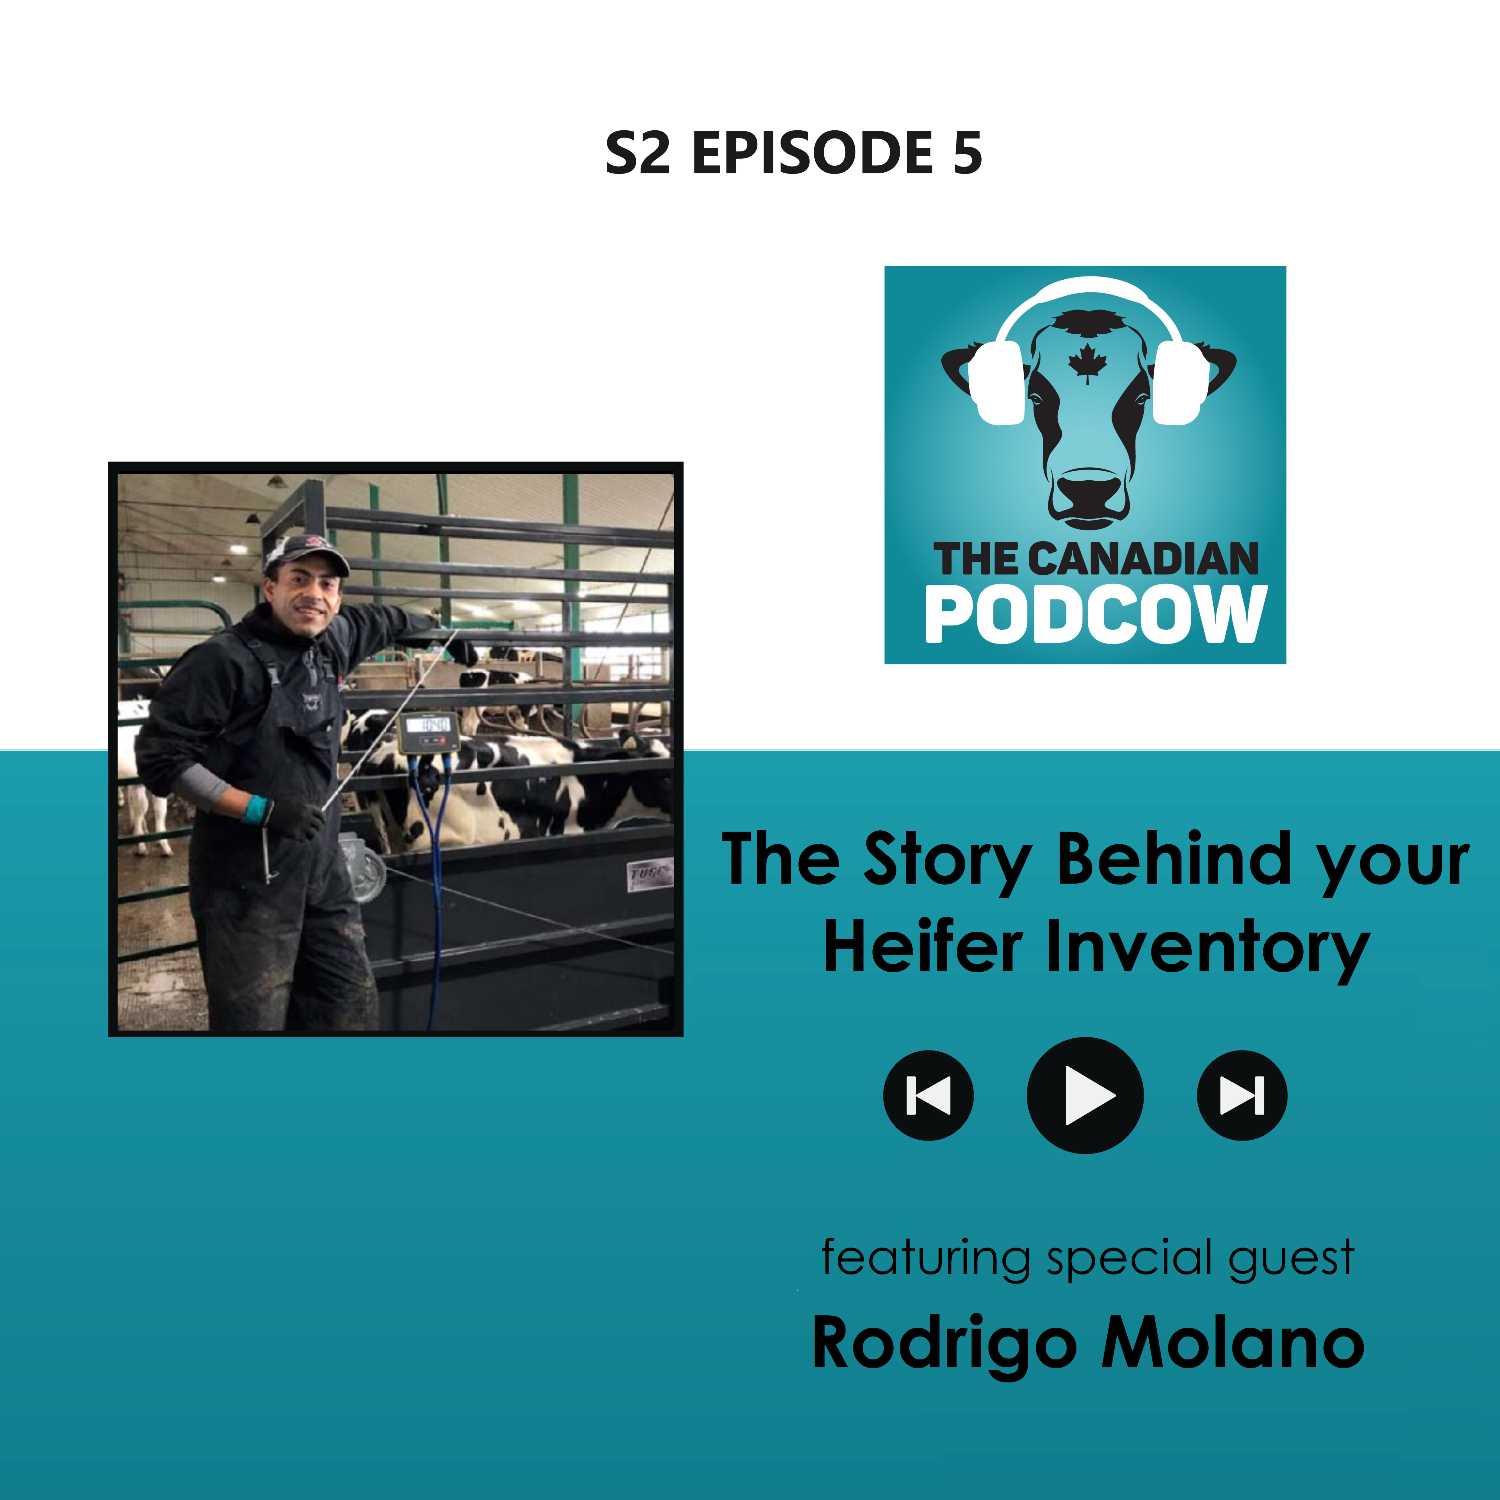 The Story Behind your Heifer Inventory